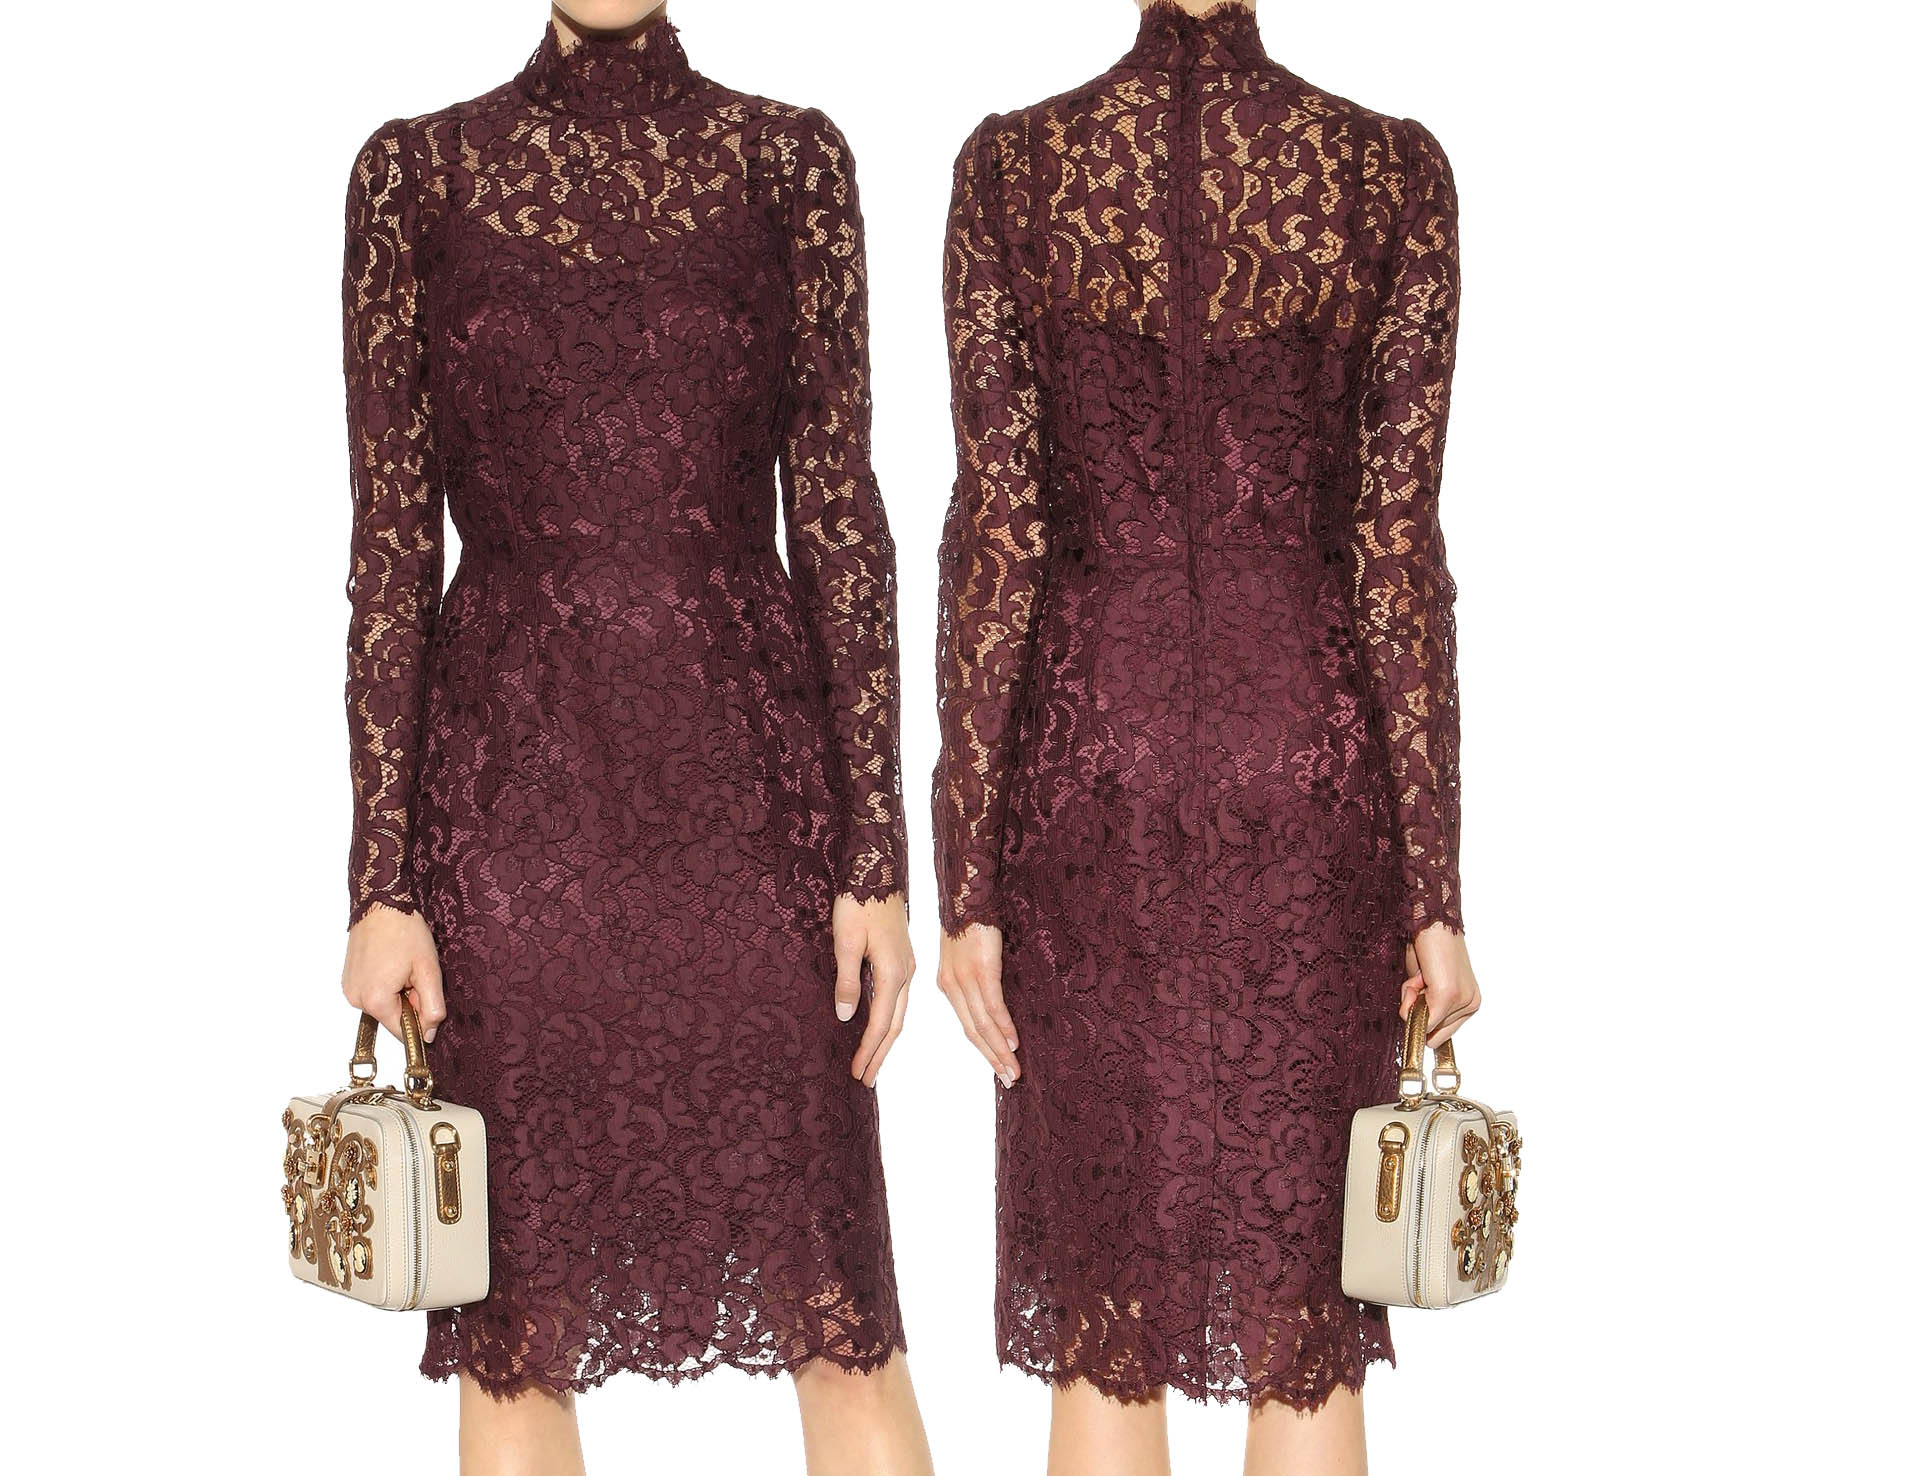 Dolce and Gabbana dark purple eggplant guipure lace dress as seen on kate middleton